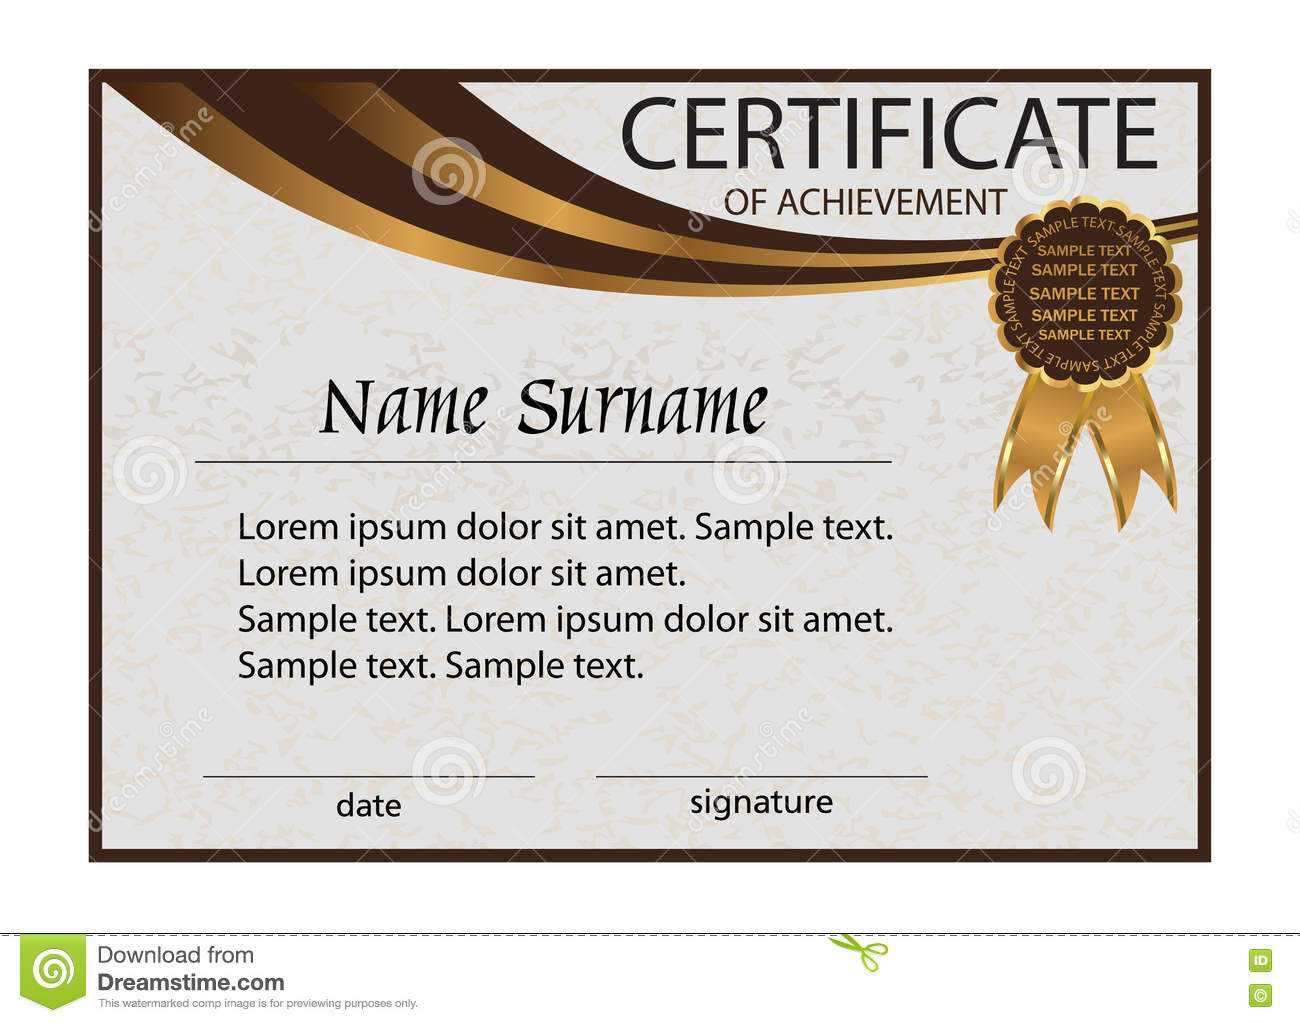 Certificate Of Achievement Or Diploma. Elegant Light Within Certificate Of Attainment Template